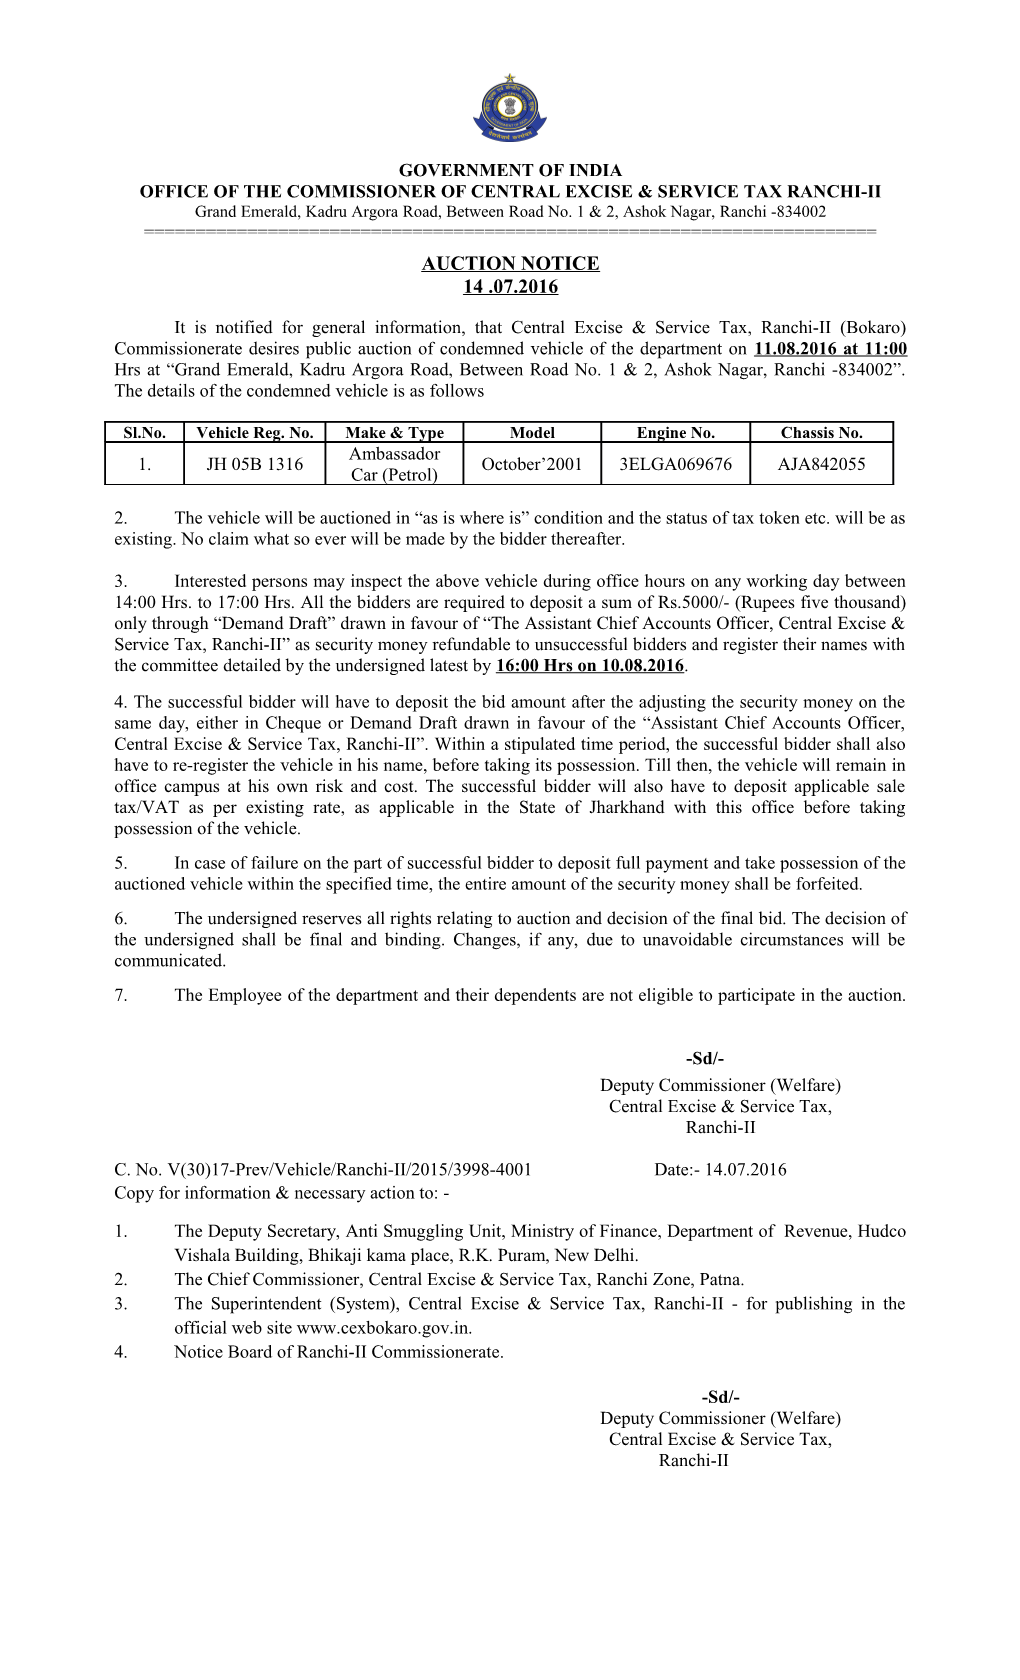 Office of the Commissioner of Central Excise & Service Tax Ranchi-Ii